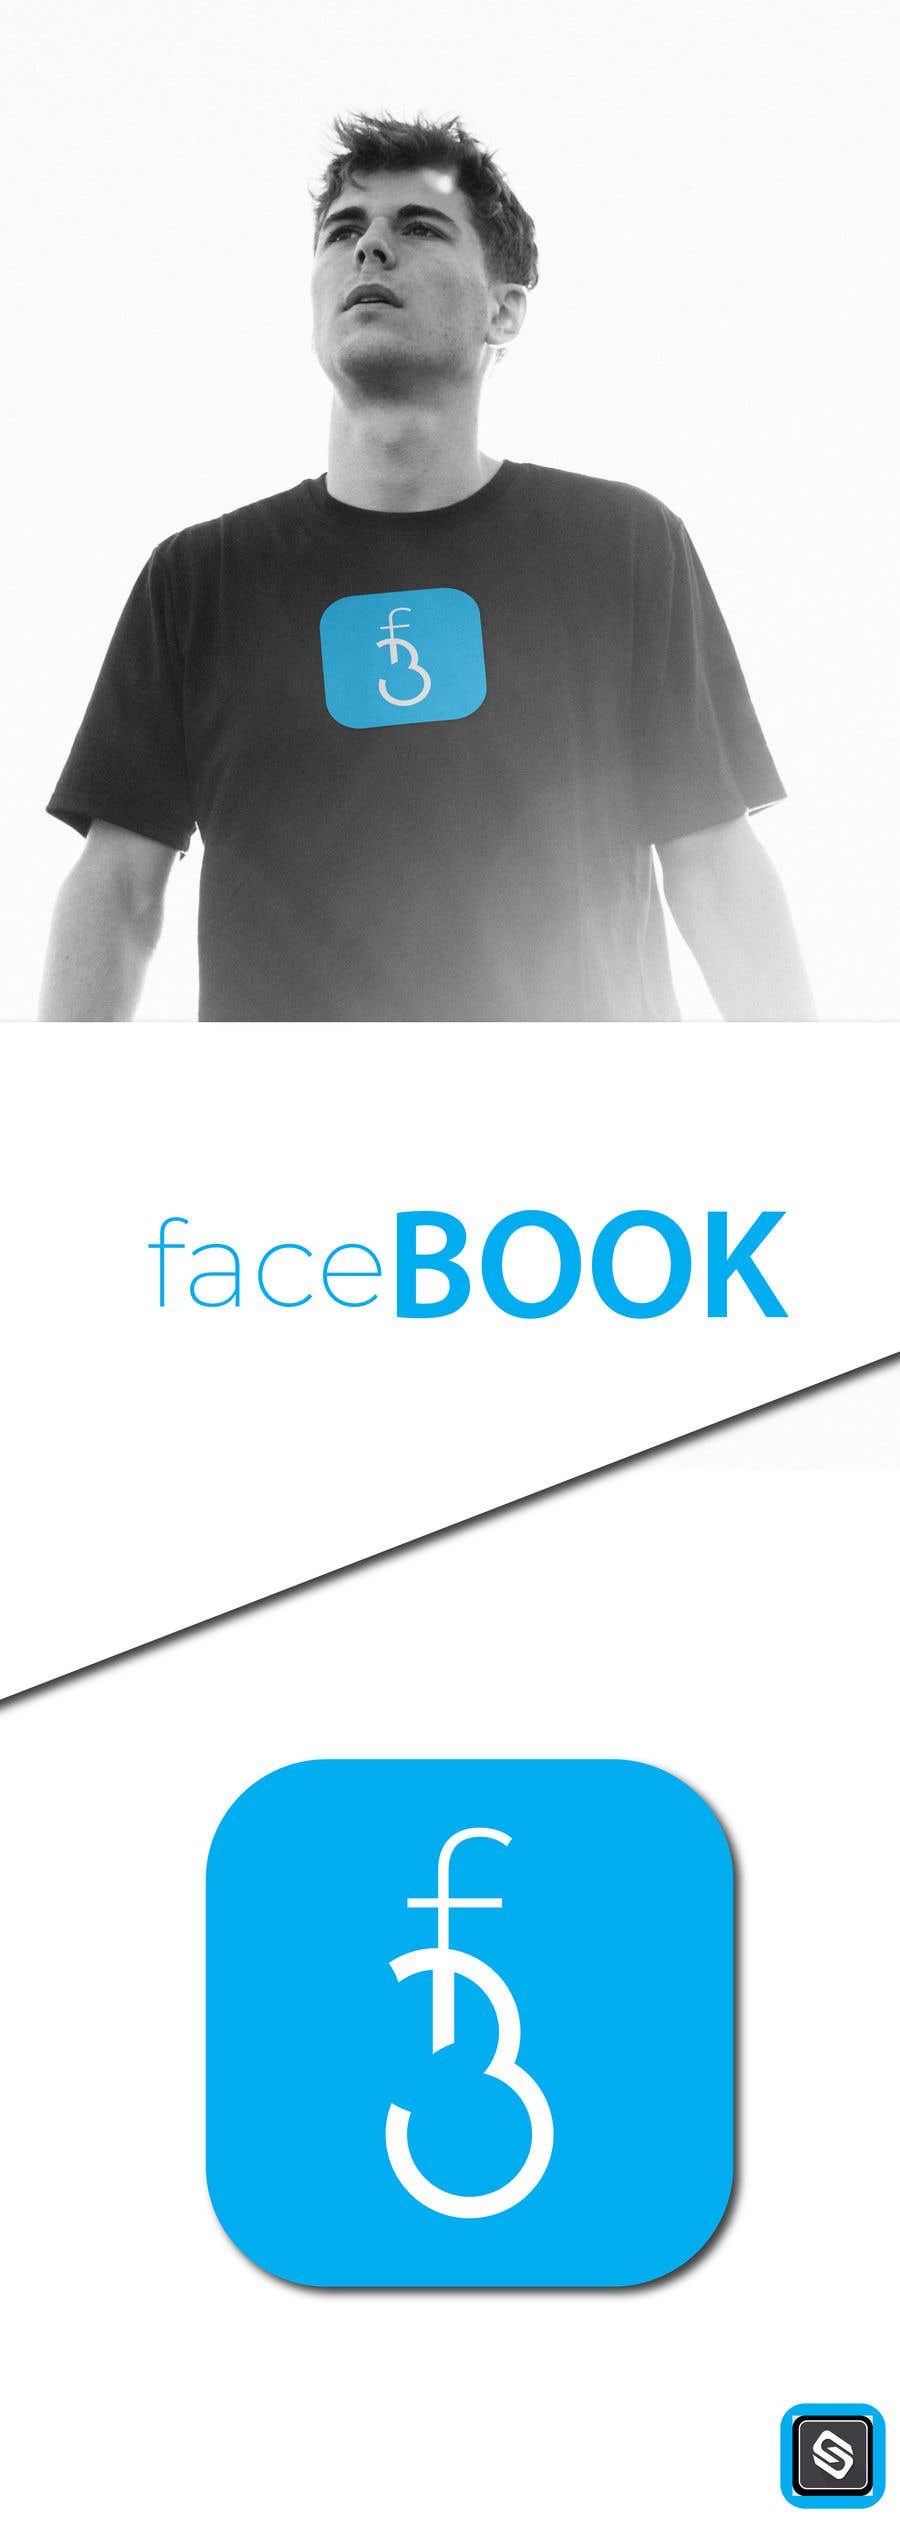 Contest Entry #1017 for                                                 Create a better version of Facebook's new logo
                                            